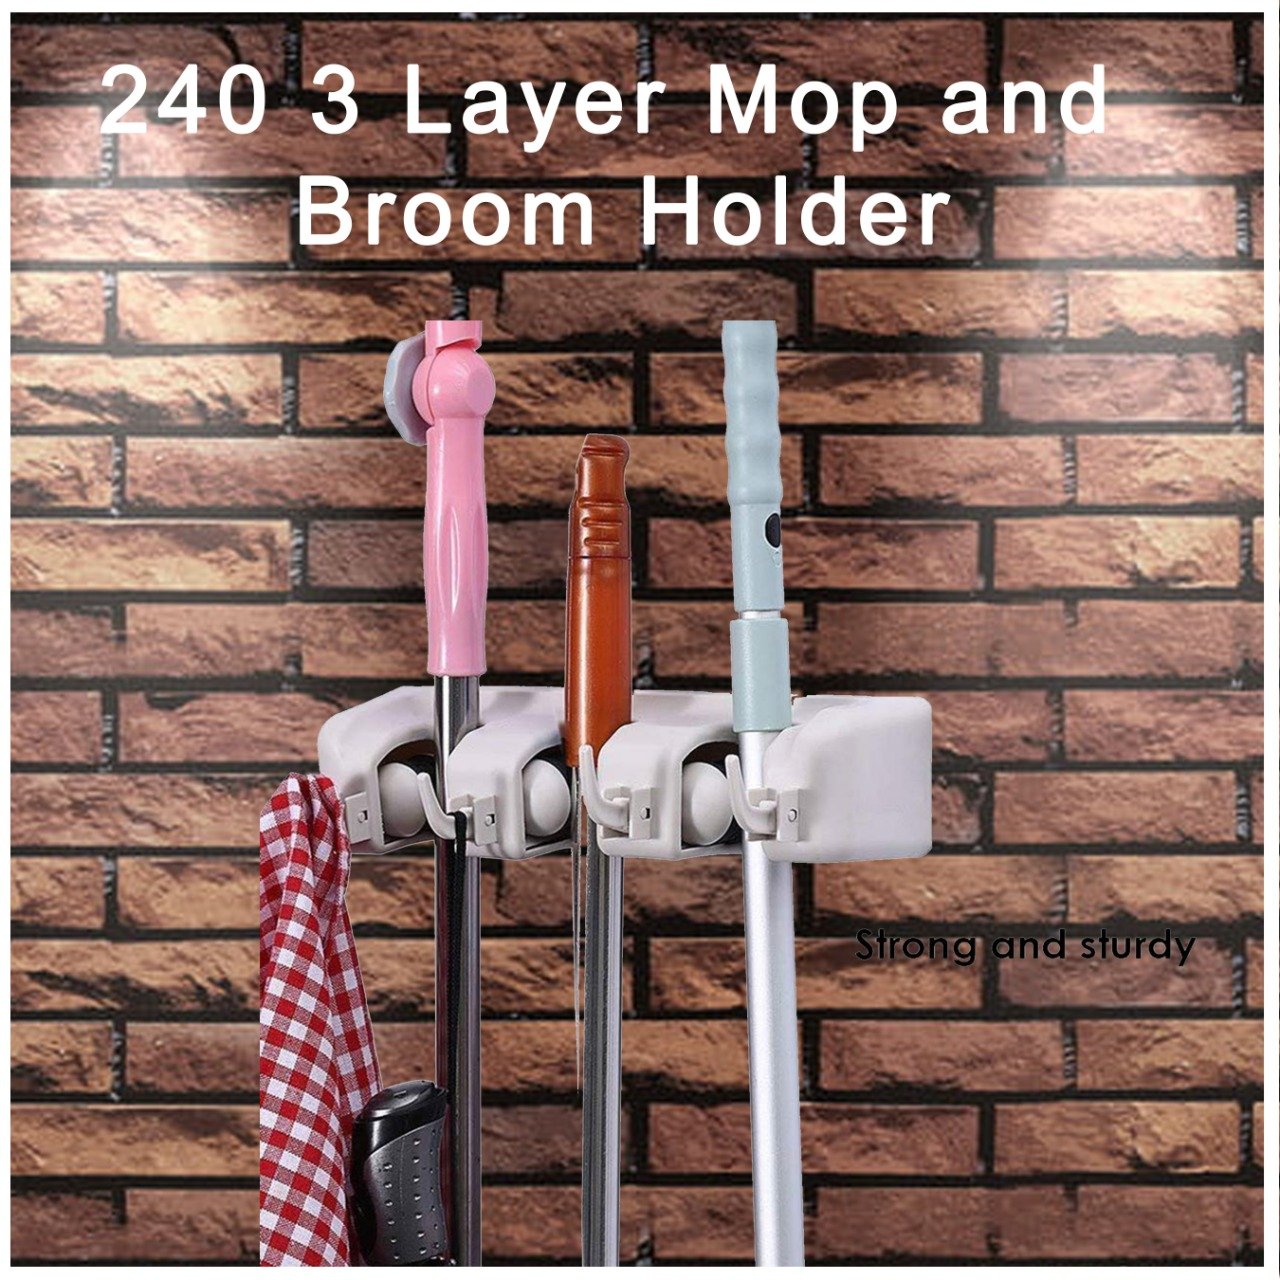 0240 3 Layer Mop and Broom Holder - SkyShopy